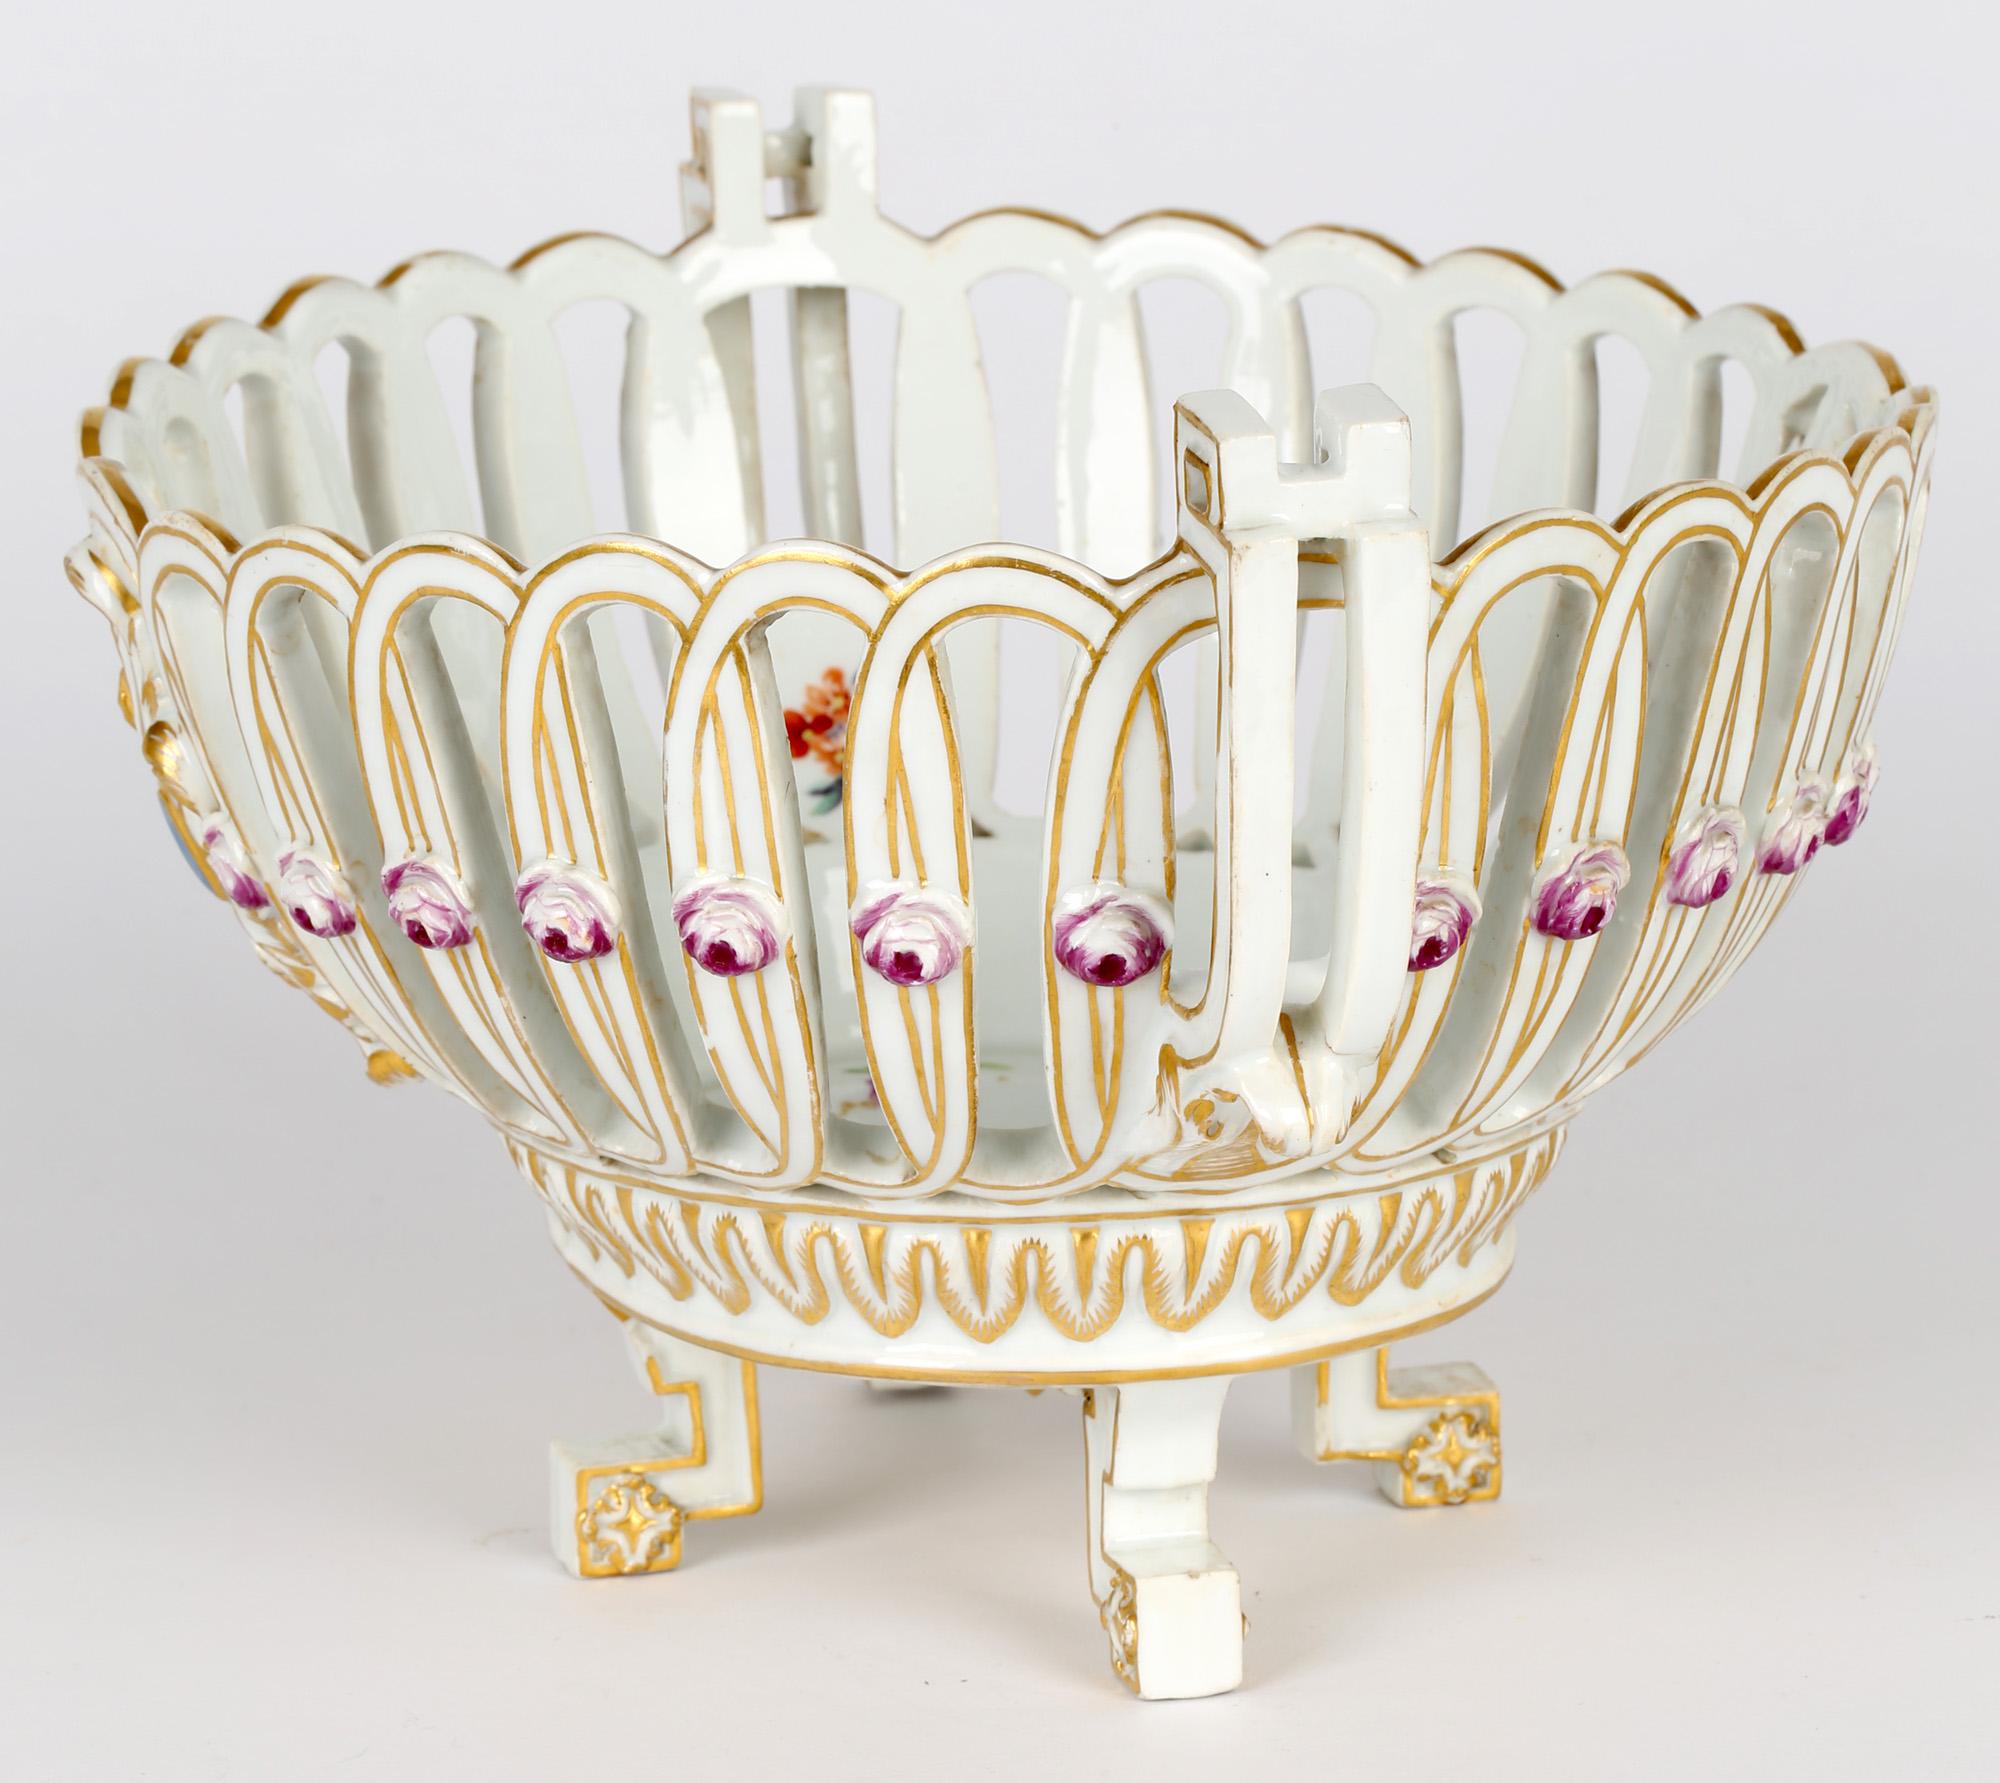 A fine antique German porcelain twin handled fruit basket by prolific makers Meissen and dating from the Marcolini period 1774 to 1814. The fruit basket stands raised on four Greek key key shaped legs with decorative terminals with a neoclassical